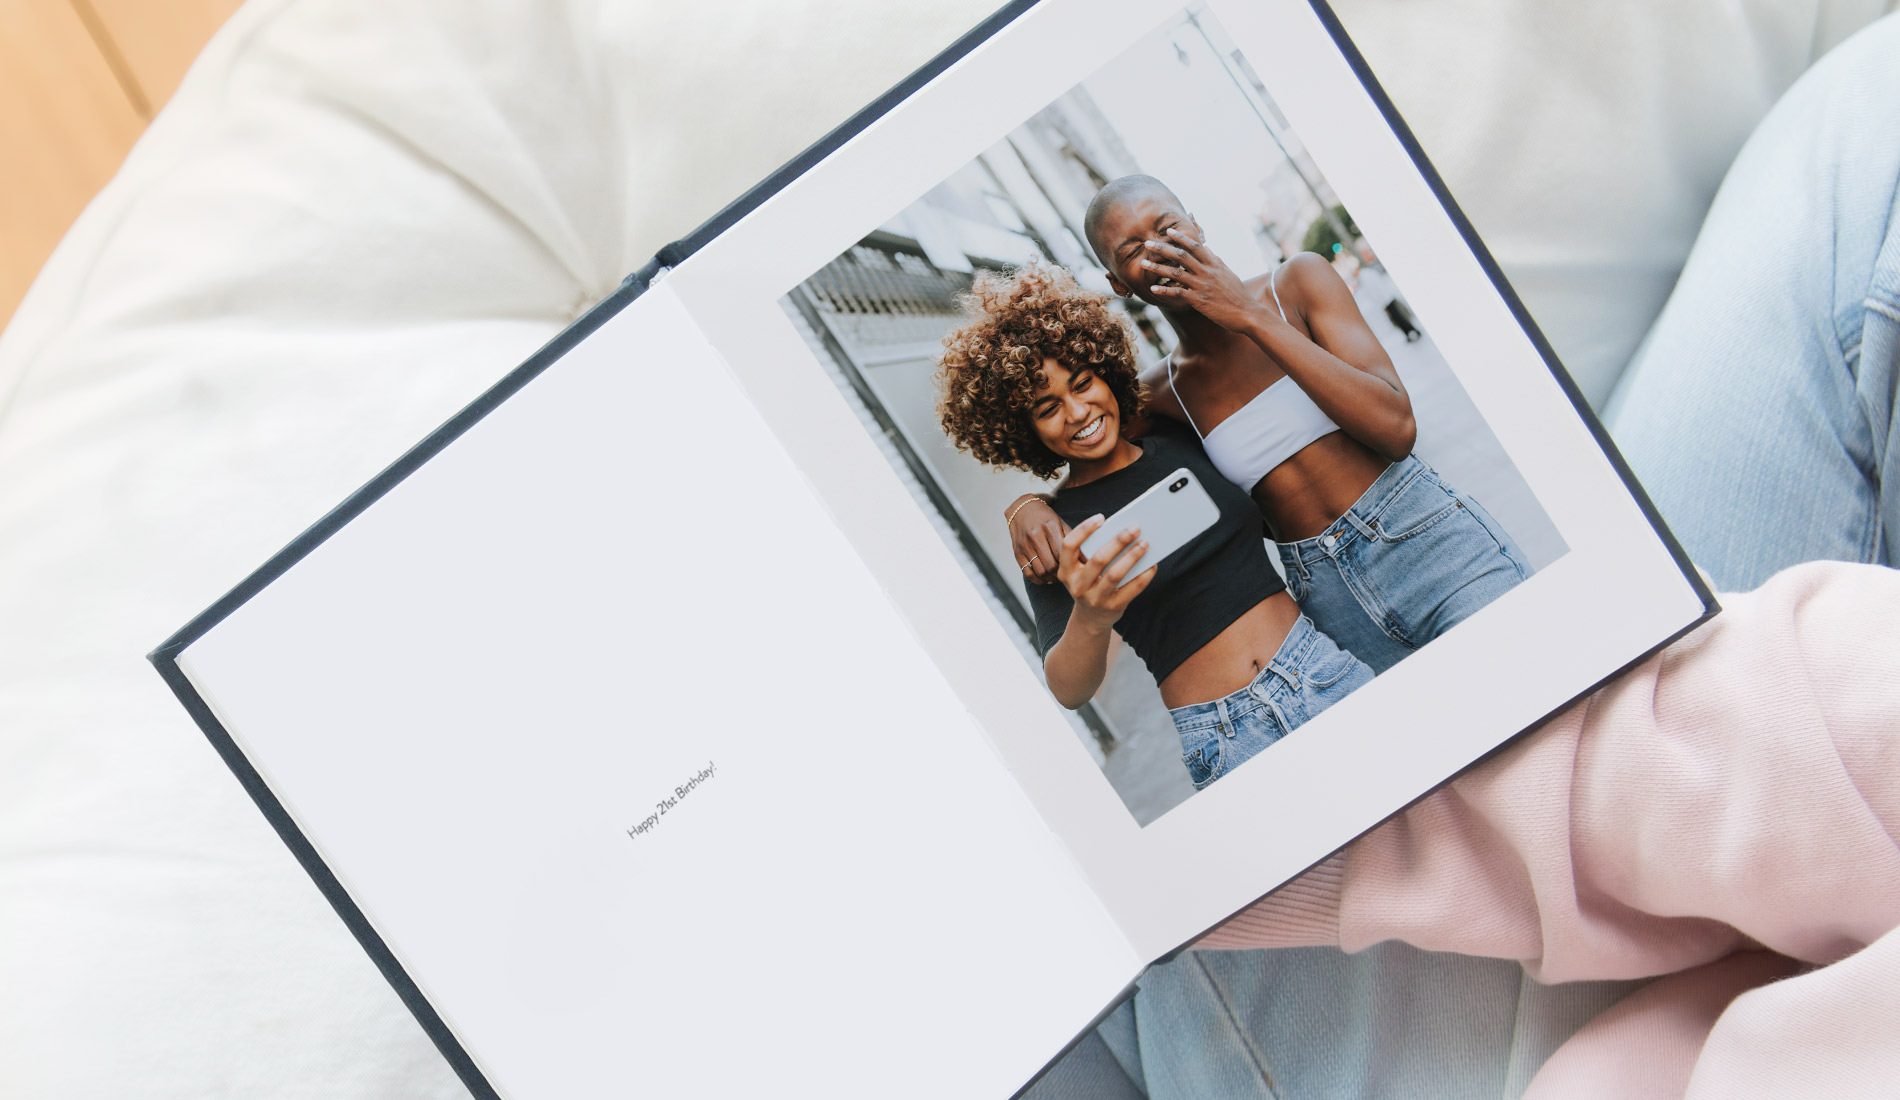 Open portrait photo book with text 'happy 21st Birthday' and image of two women taking a selfie